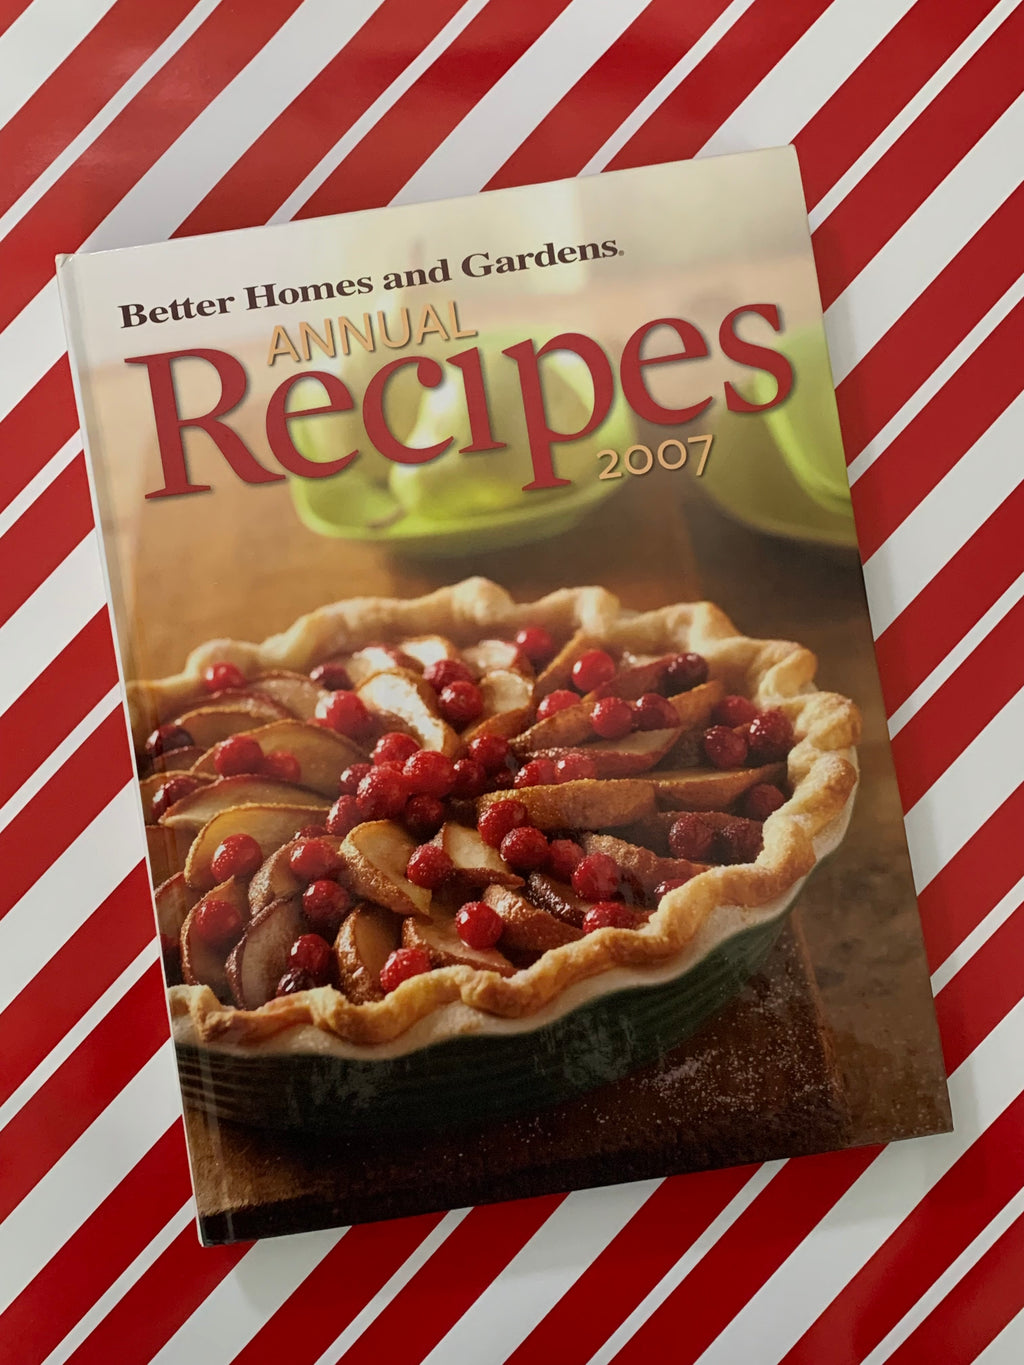 Better Homes and Gardens: Annual Recipes 2007